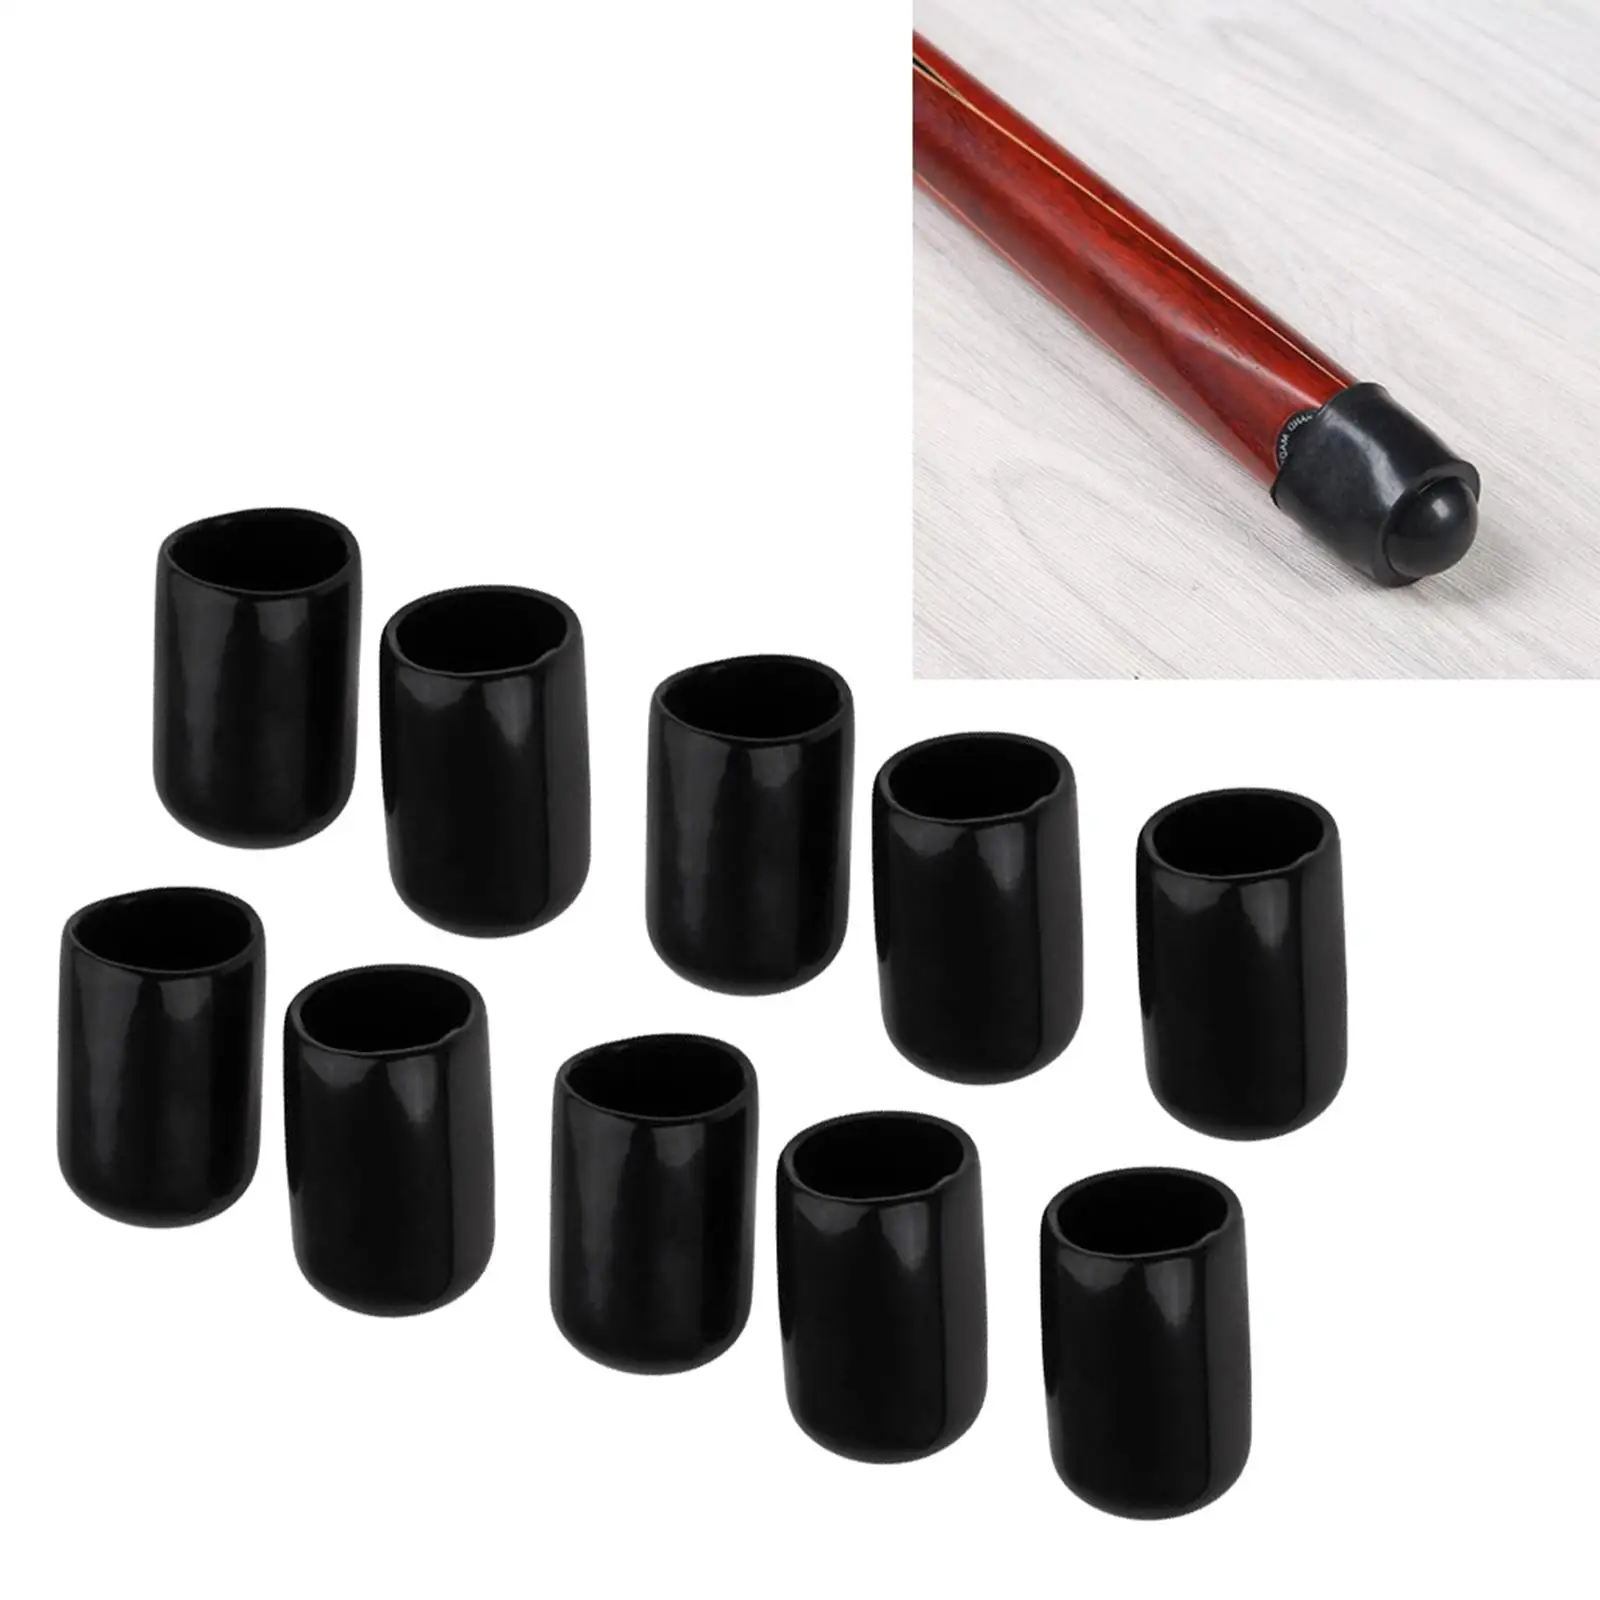 10x Pool Cue Tips Hat Replacement Durable Moistureproof Black 10mm Billiards